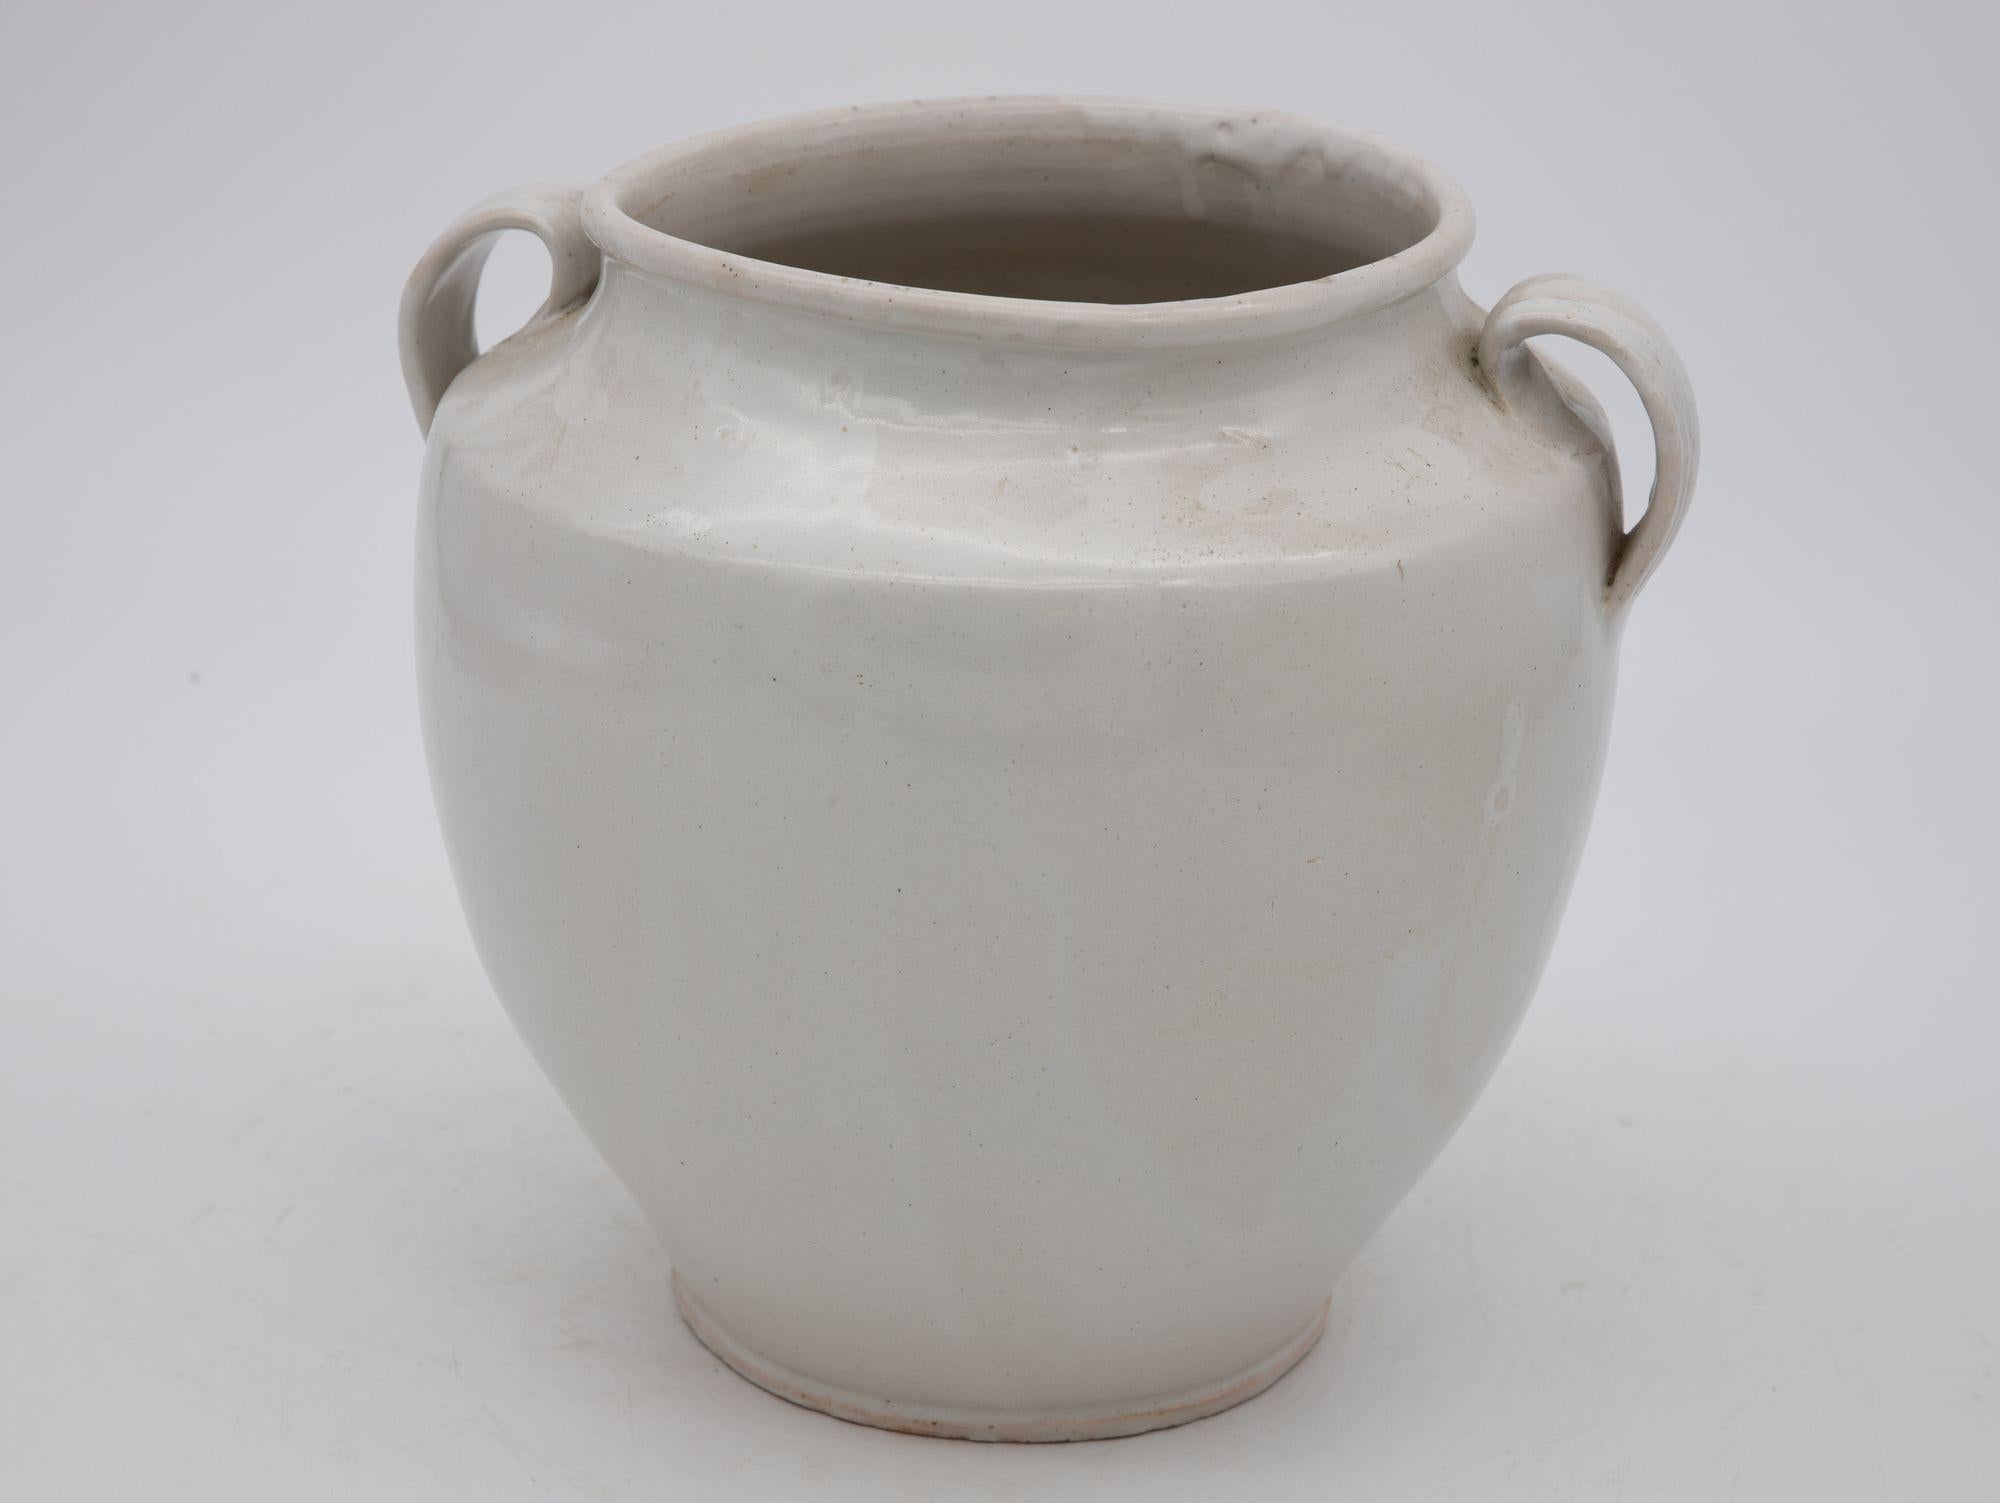 Ceramic French Pottery Urn with Handles, 20th Century